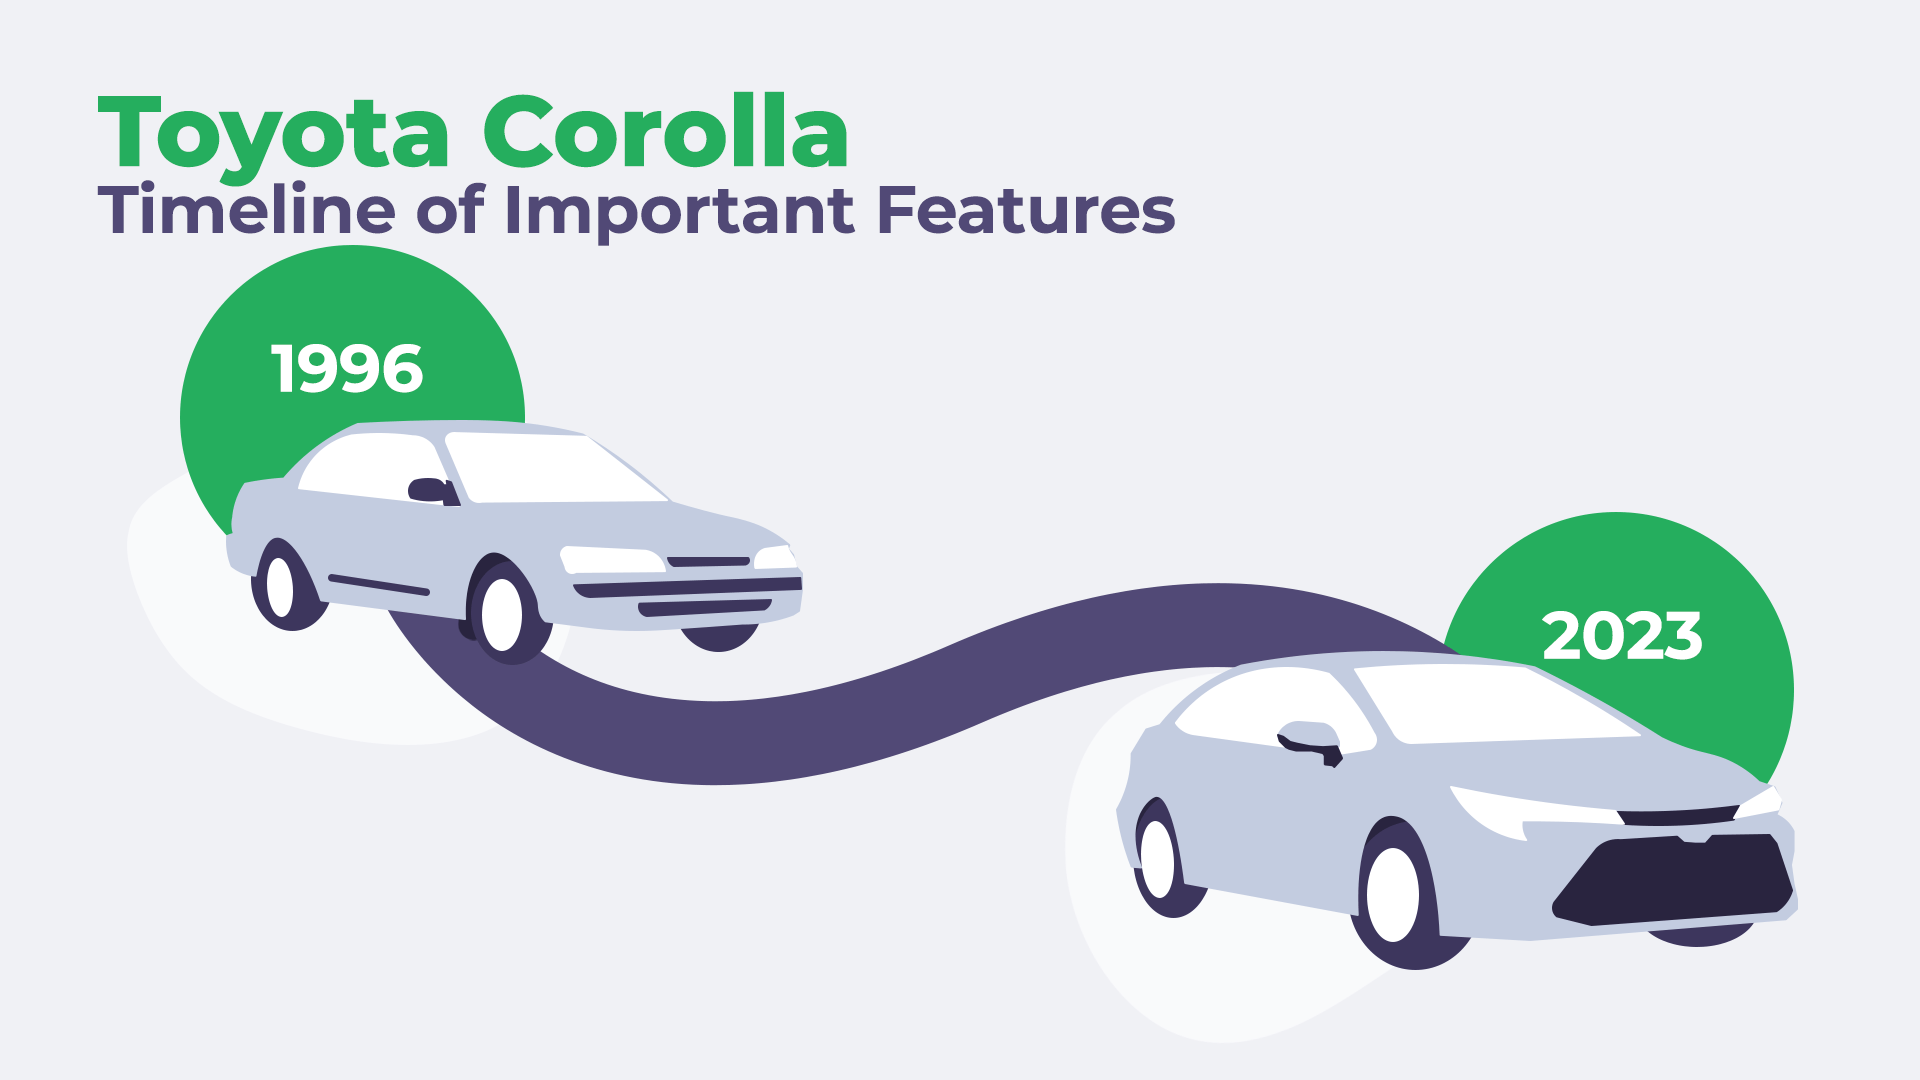 Toyota Corolla Timeline of Important Features